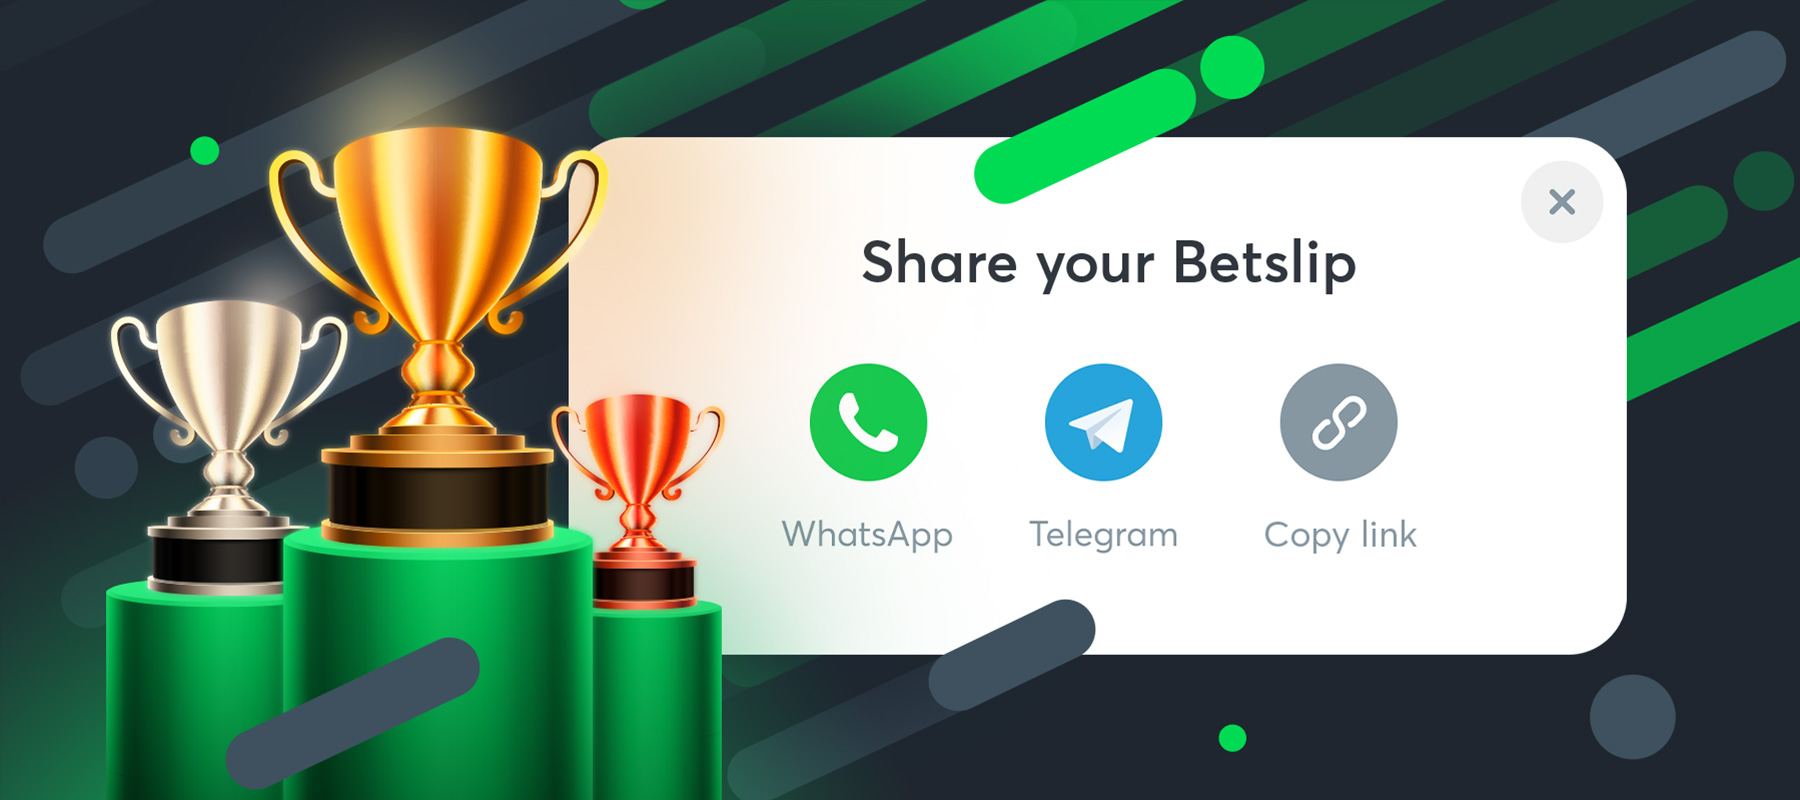 Share your betslips and win prizes!